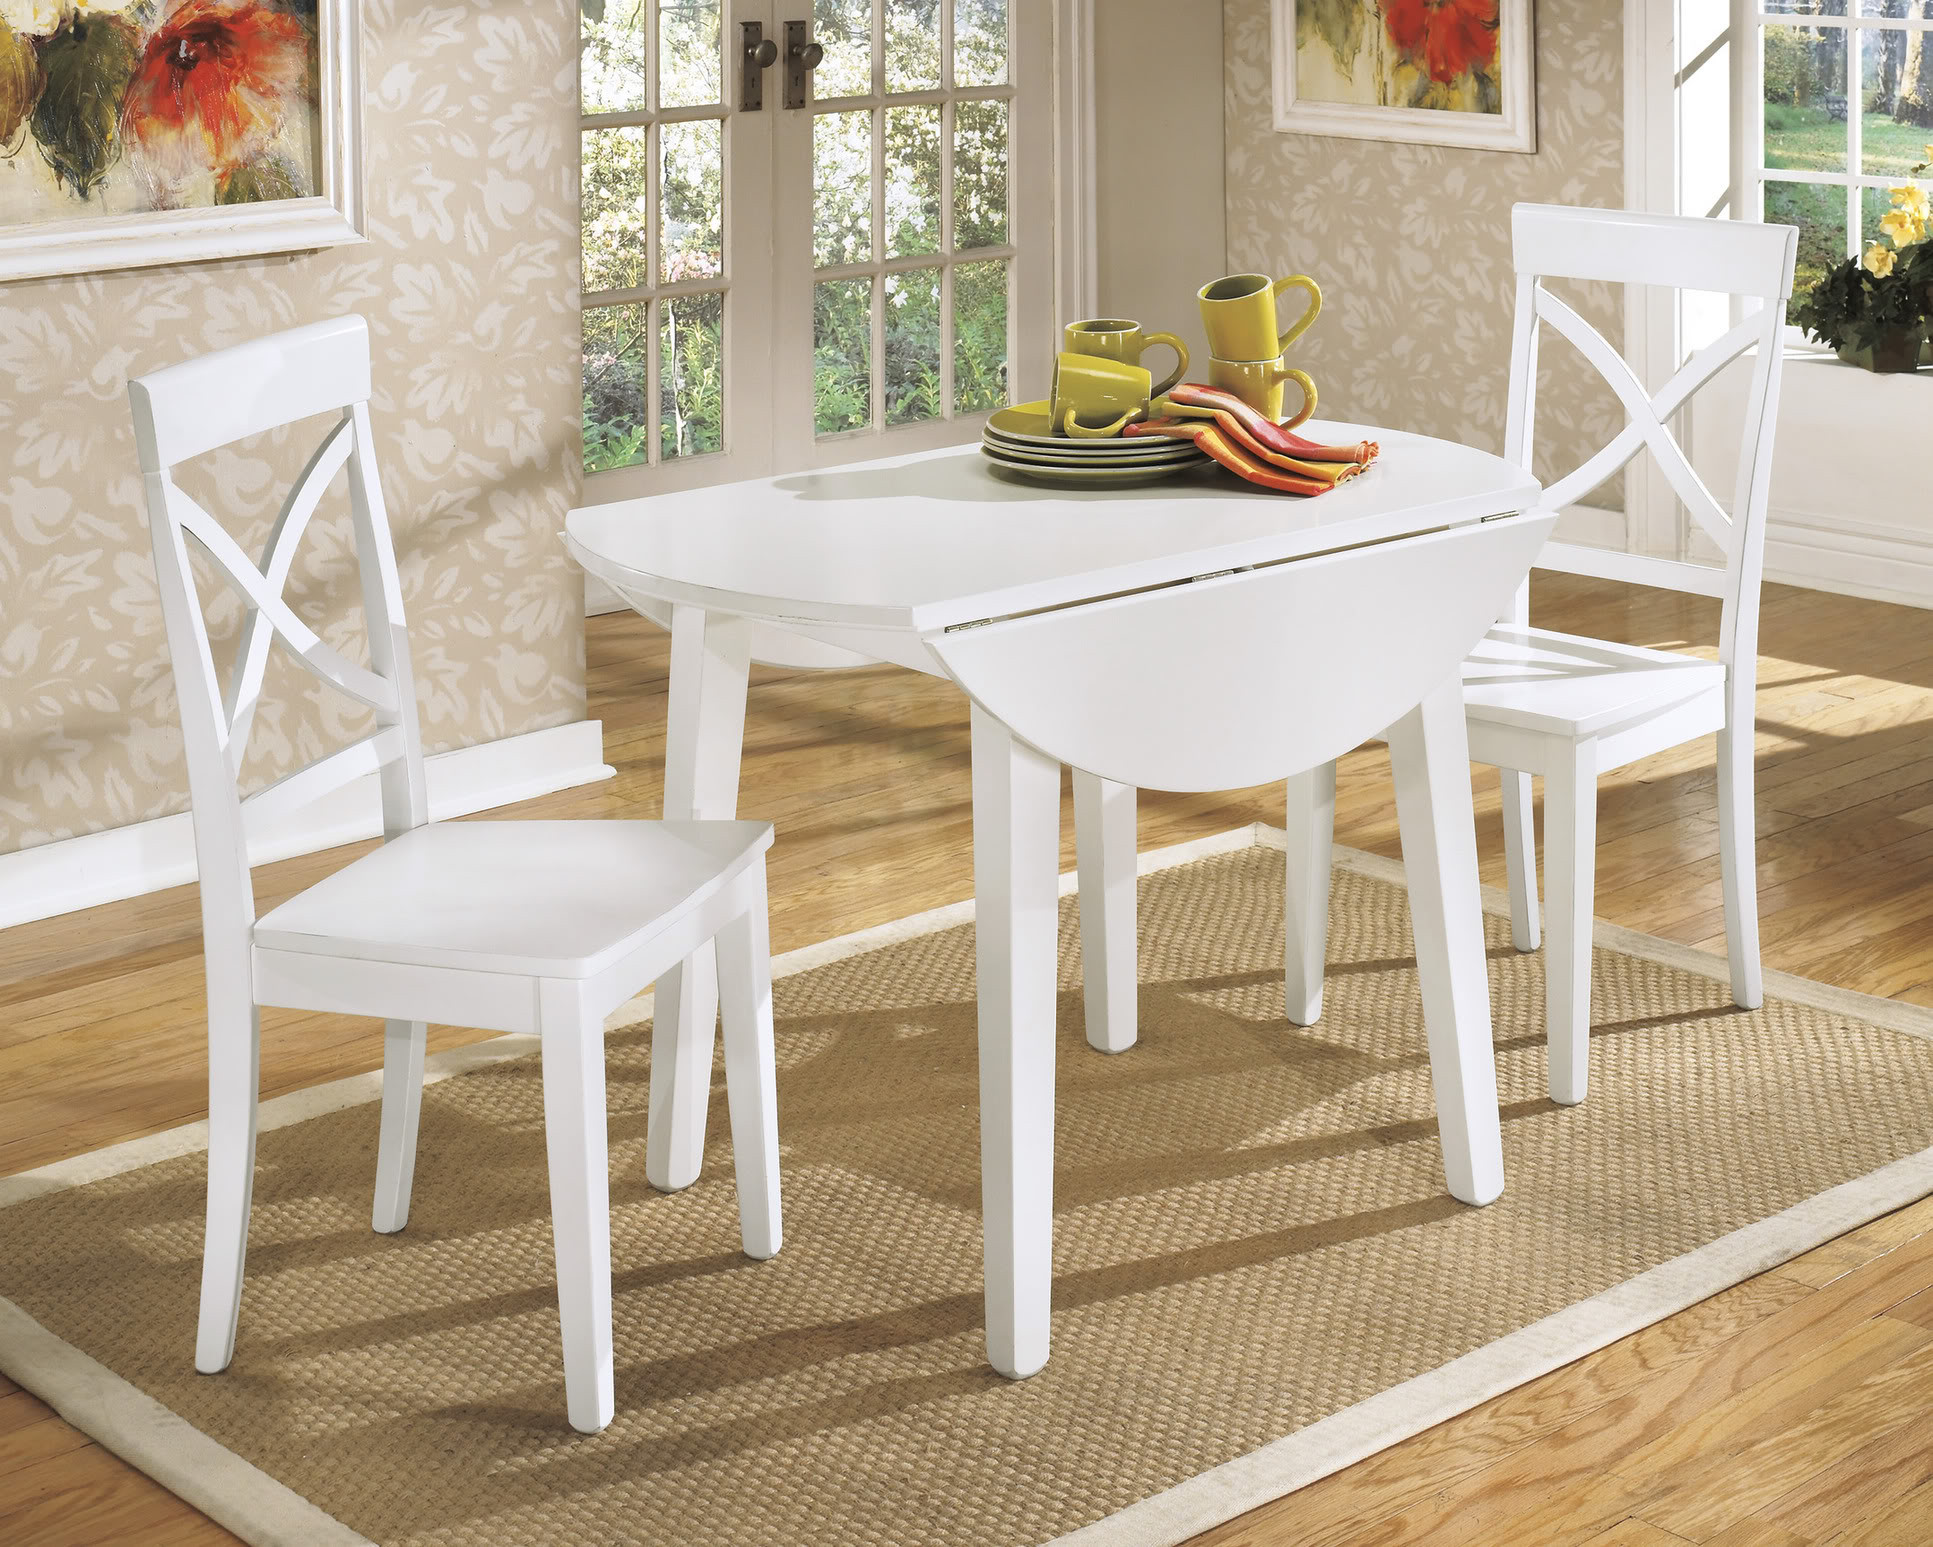 Small White Kitchen Tables
 White Round Kitchen Table and Chairs Design – HomesFeed